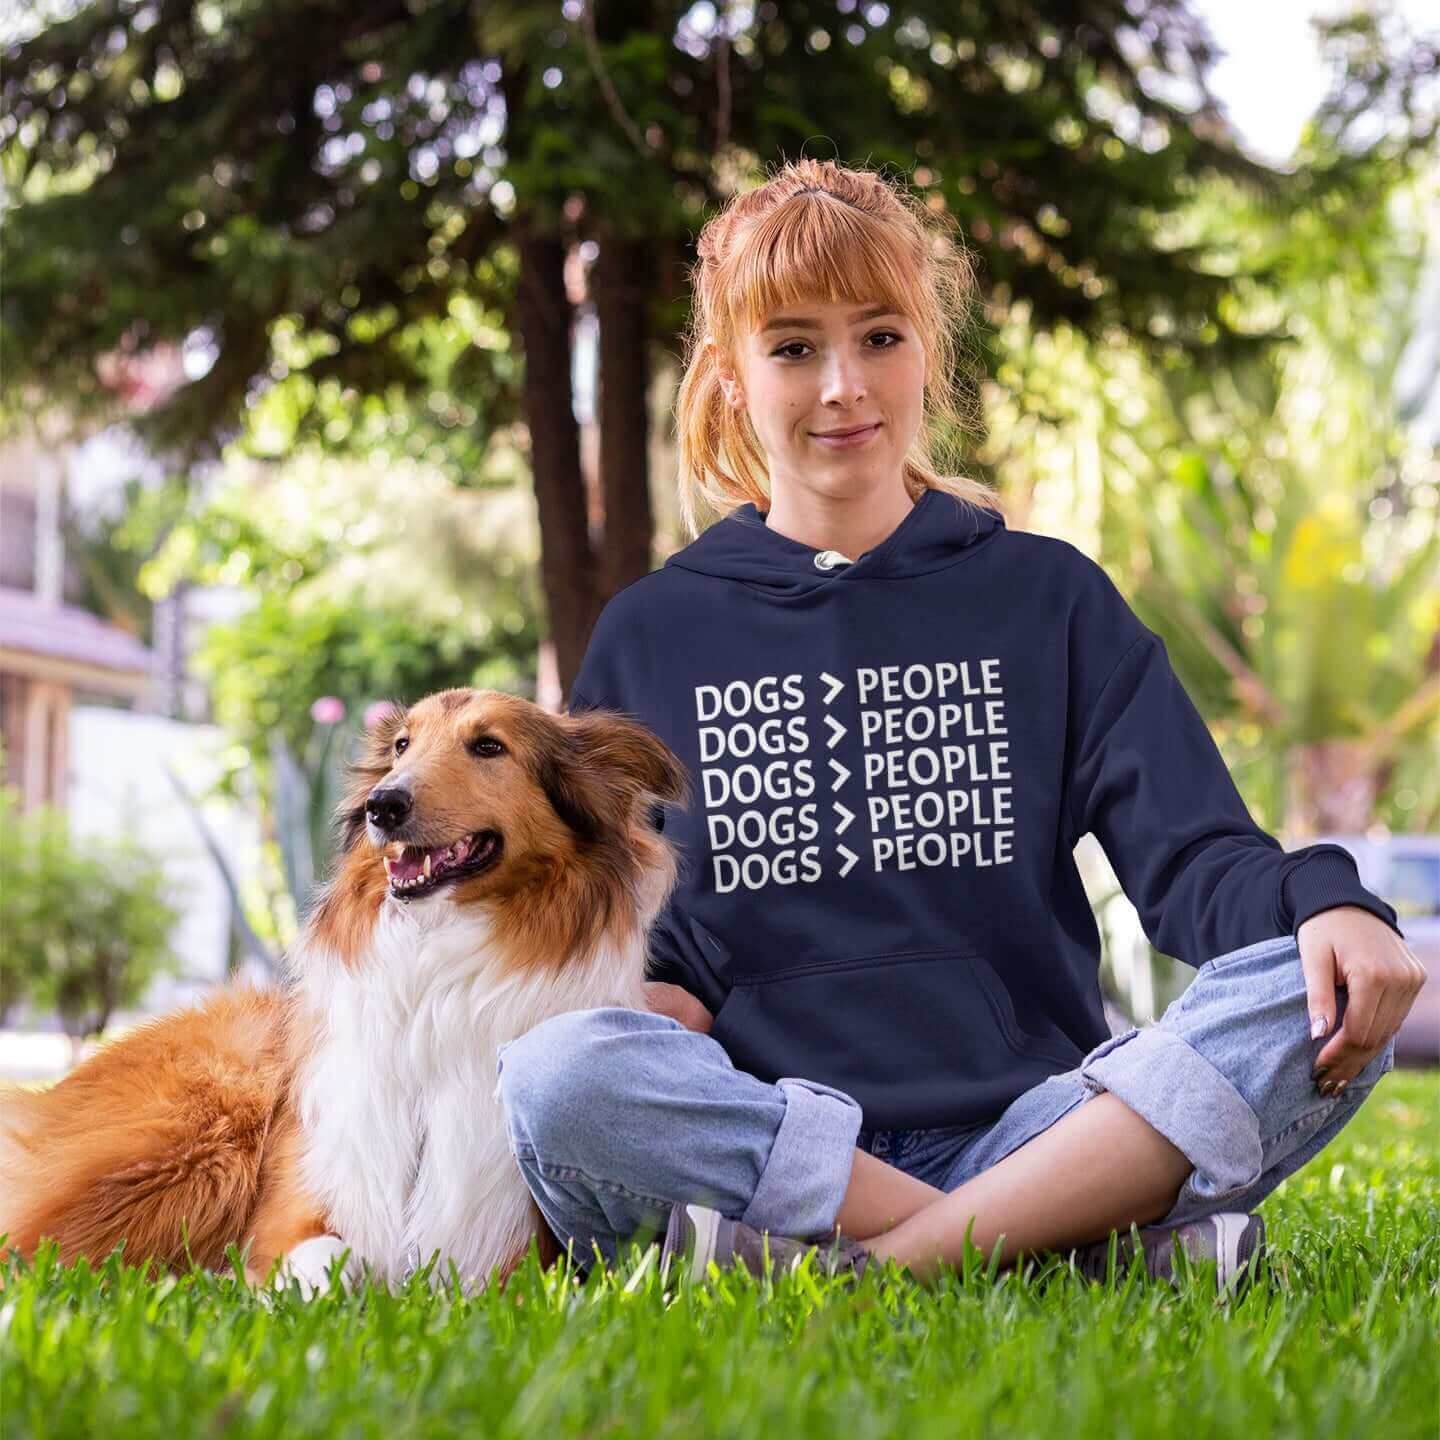 Dogs > than people hoodie. Dogs are greater than people hooded sweatshirt